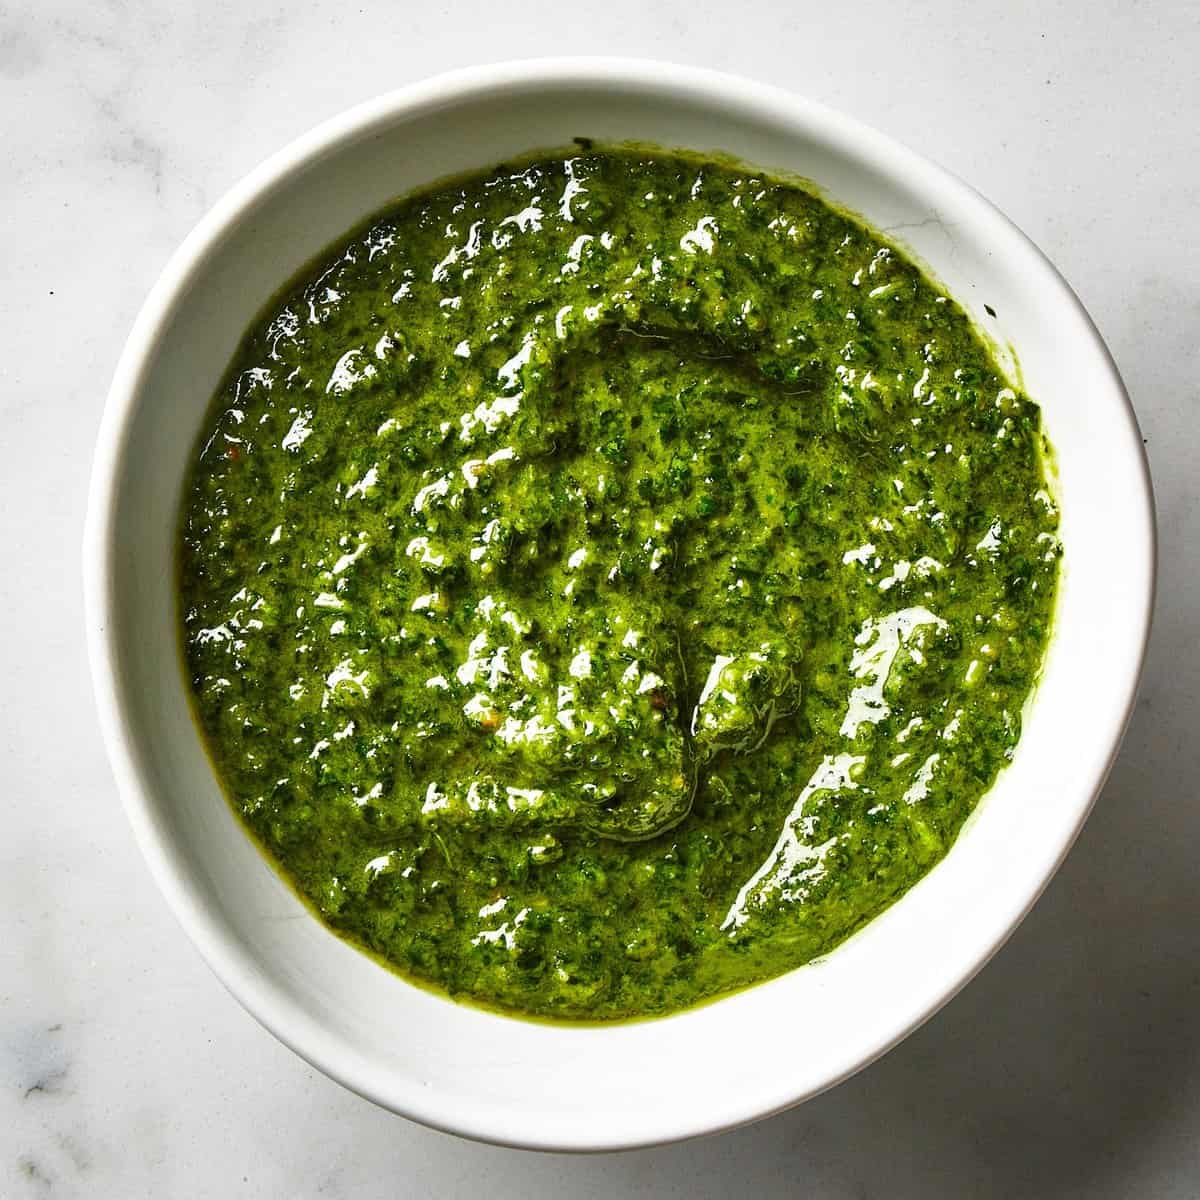  Your taste buds will thank you for this explosive pesto sauce.